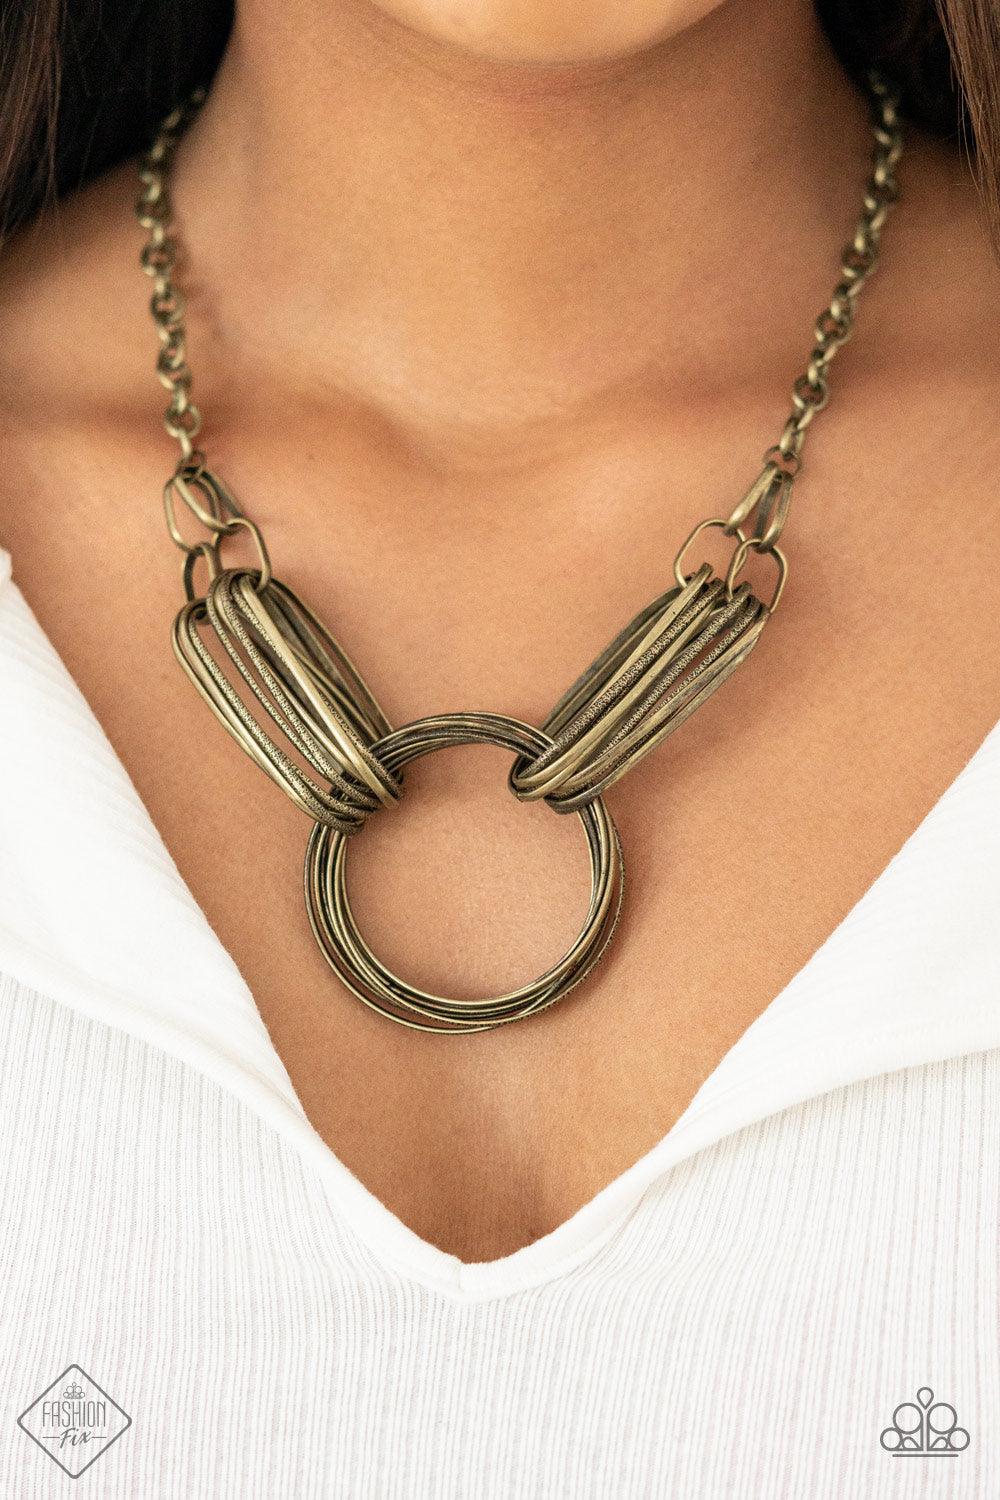 Paparazzi Accessories Lip Sync Links - Brass Layers of oblong brass links attach to a collection of oversized antiqued brass rings creating a dramatic industrial centerpiece. Attached to a brass chain, the rustic links create an unconventionally edgy stat